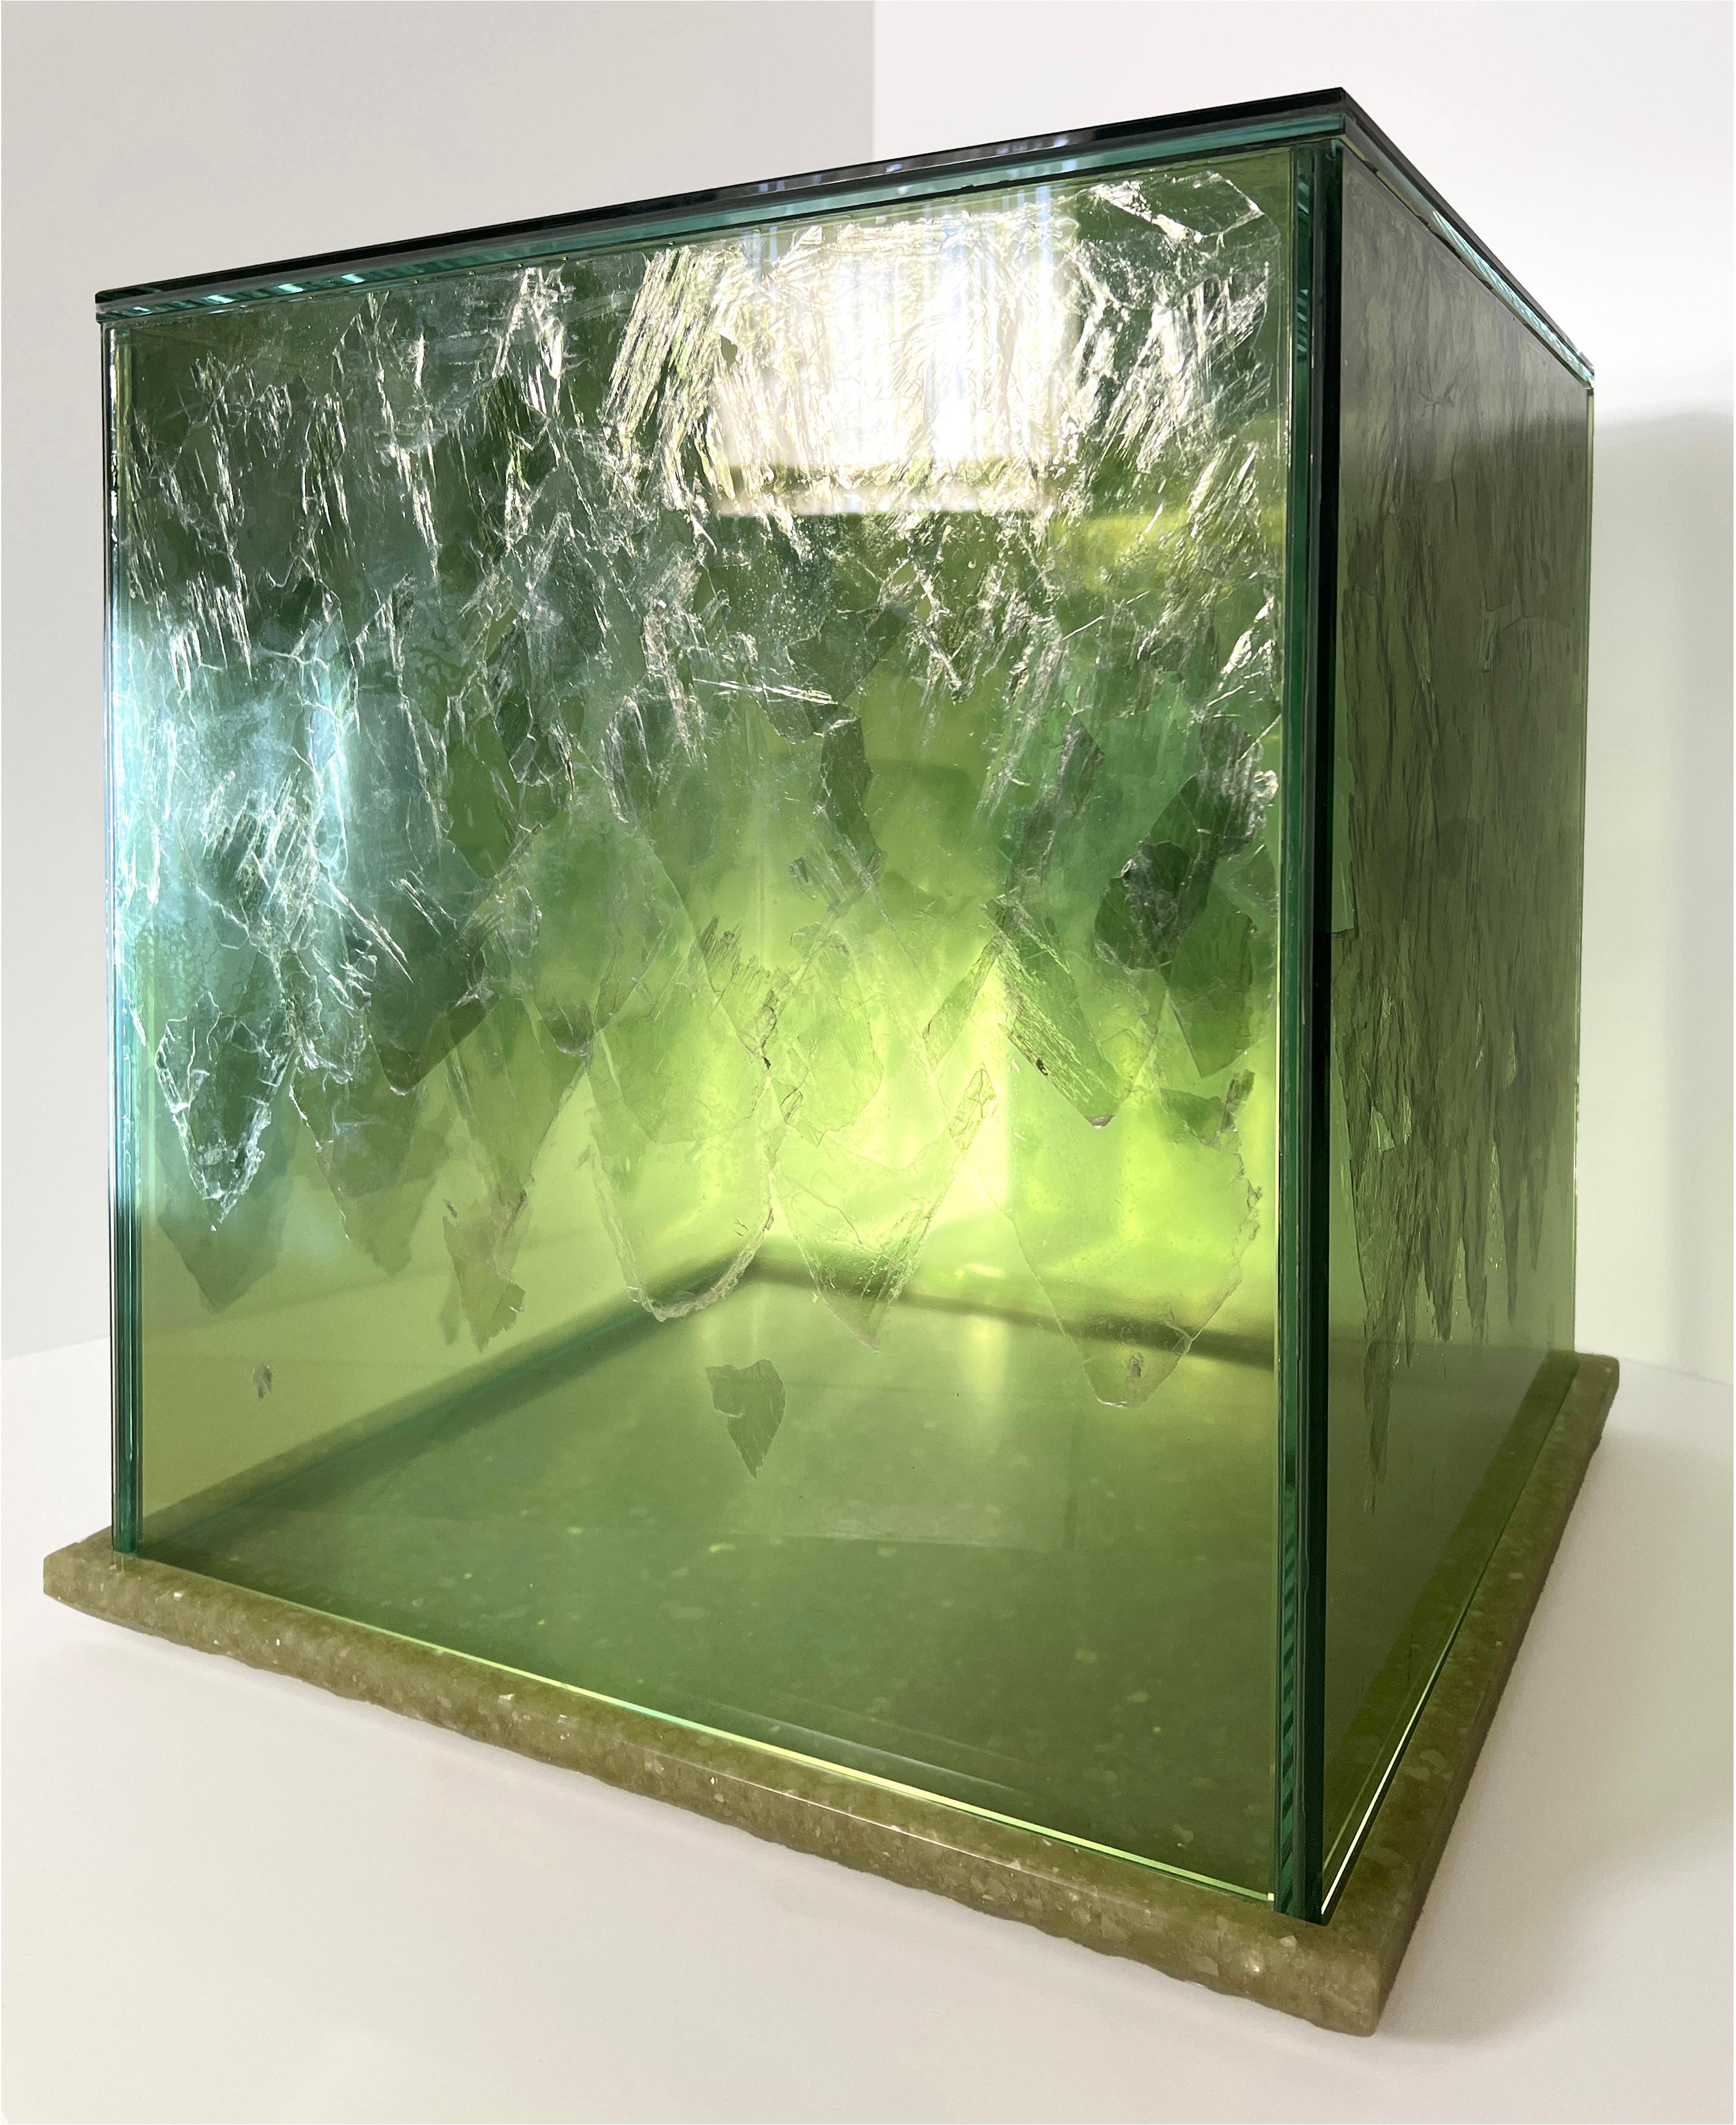 INTERMICA (CAUSEWAY)
SIDE TABLE, 2023

InterMica® glass: Laminated Starphire sublimation-printed glass with green mica flakes; Base: Polyester resin panel, 20 x 20 x 20 in.

InterMica is an architectural specialty glass product, crafted from